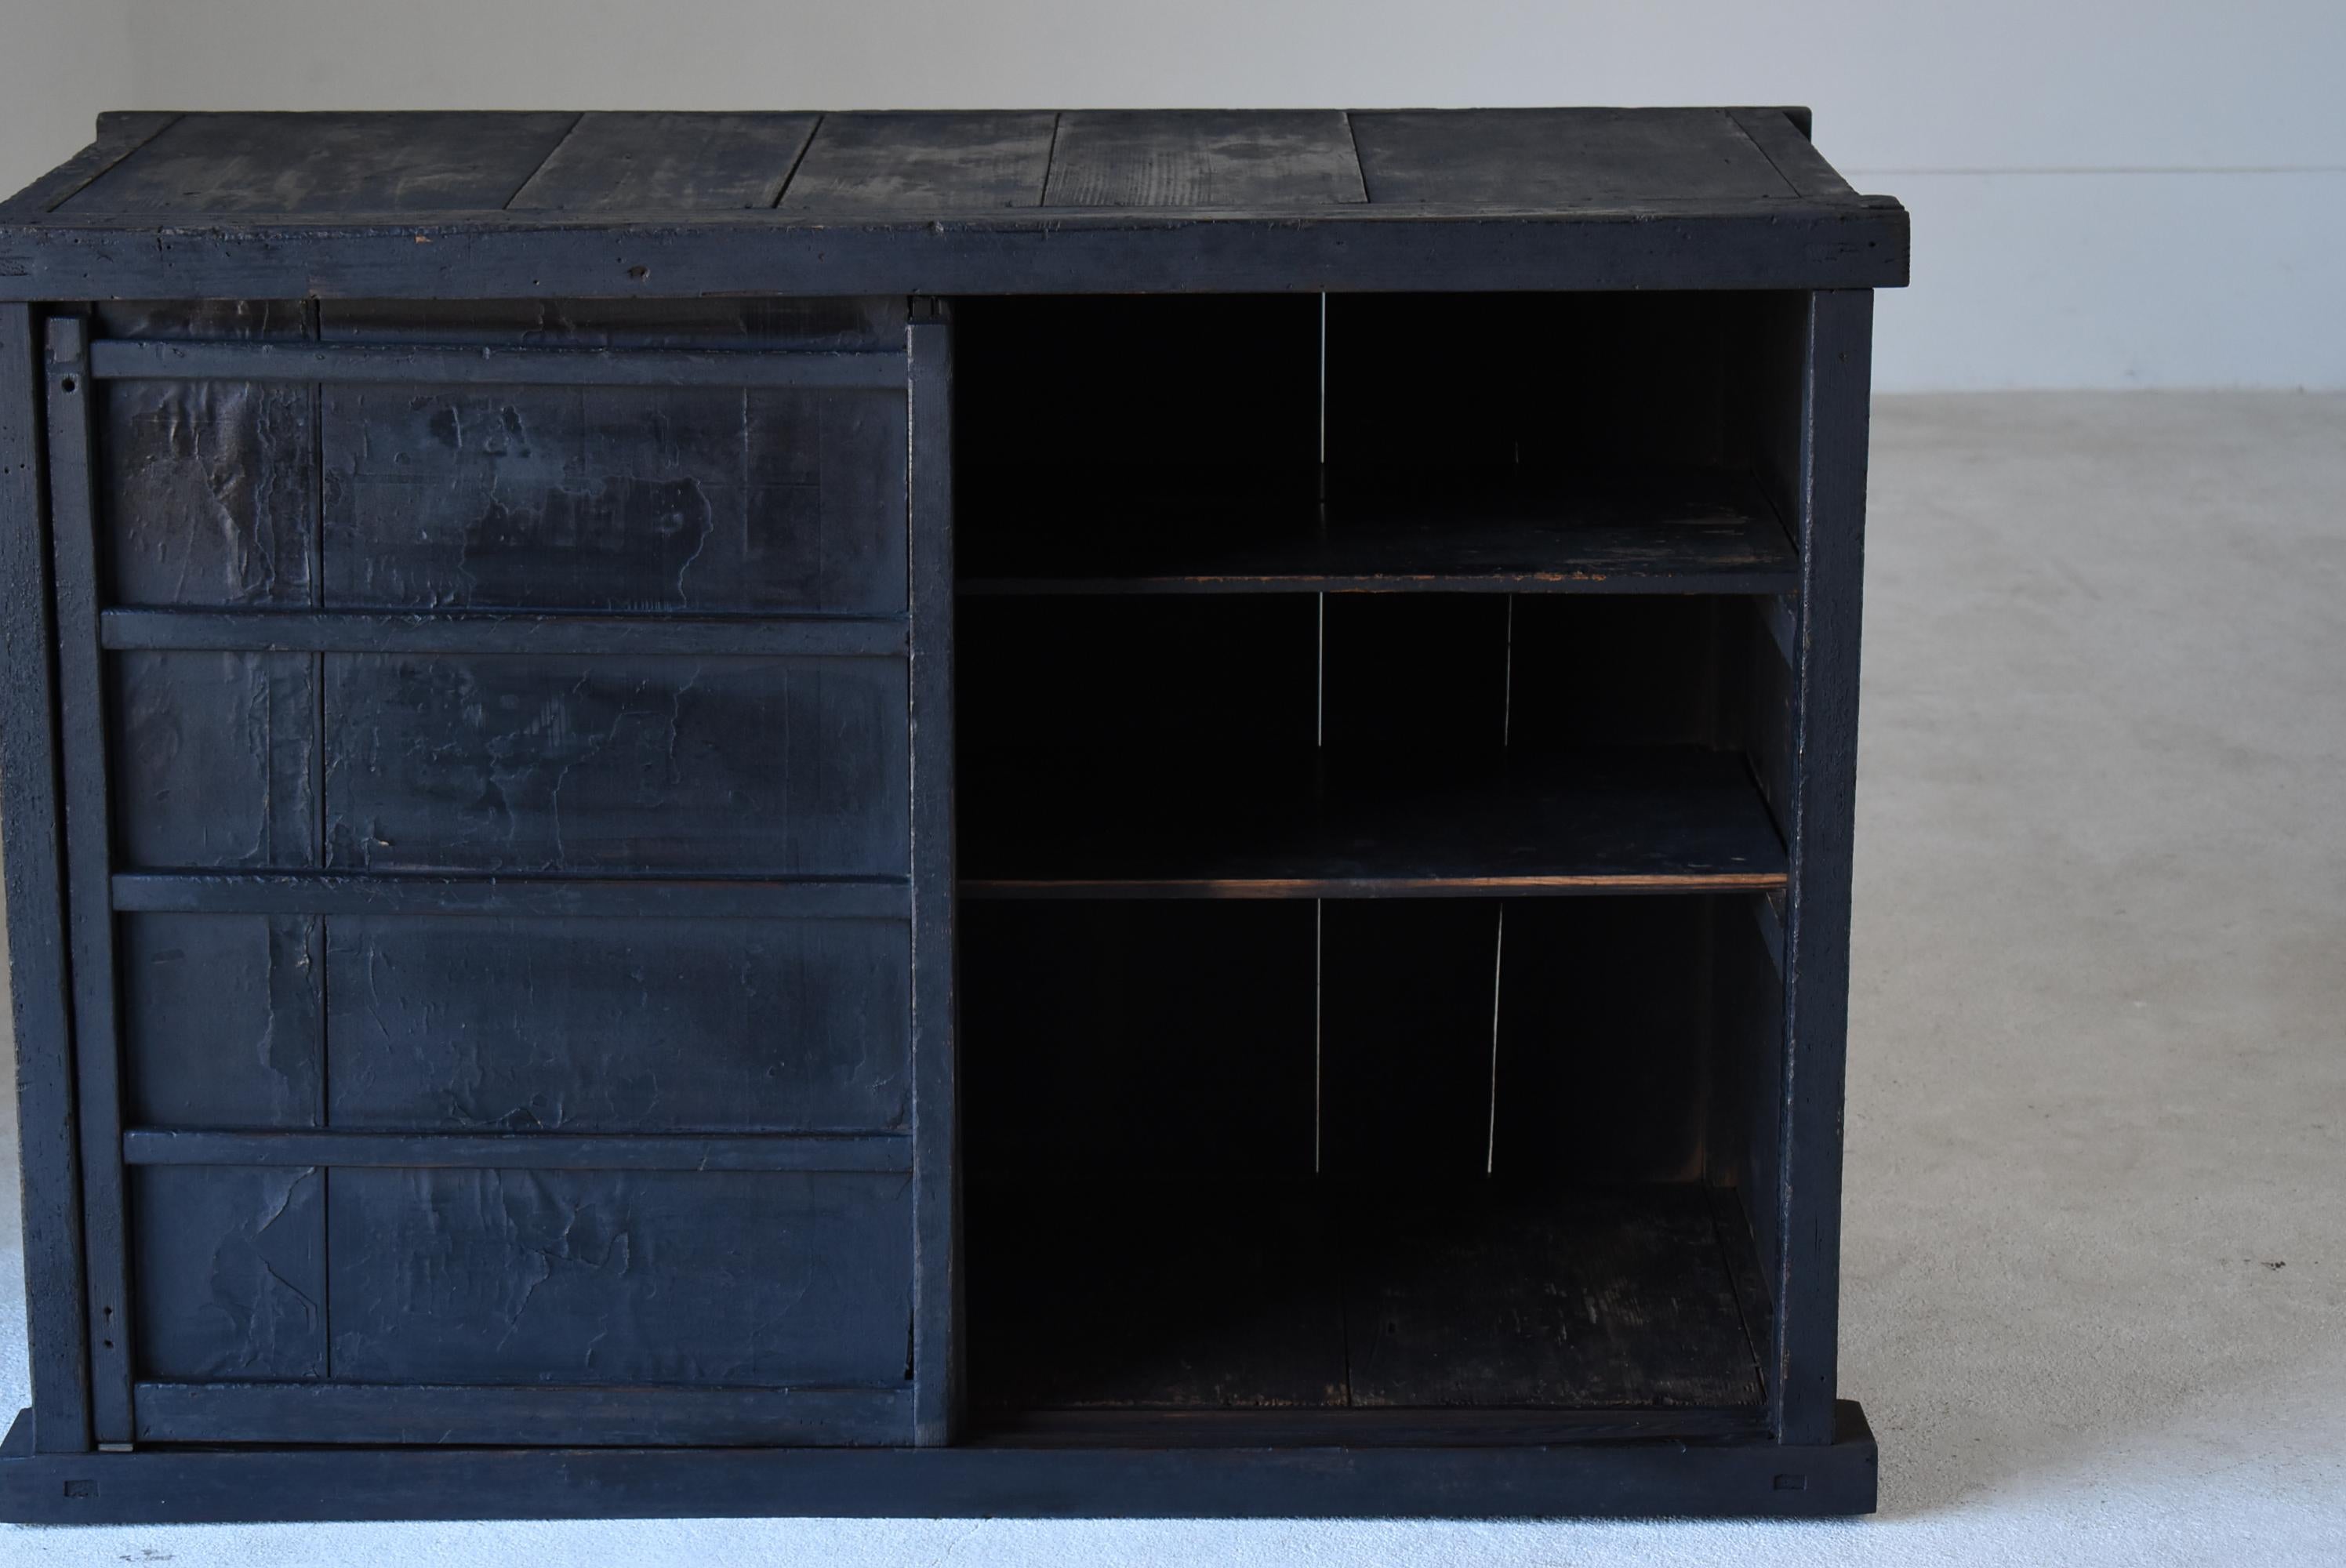 Japanese Antique Black Tansu 1800s-1860s/Chests of Drawers Cabinet Wabisabi 2